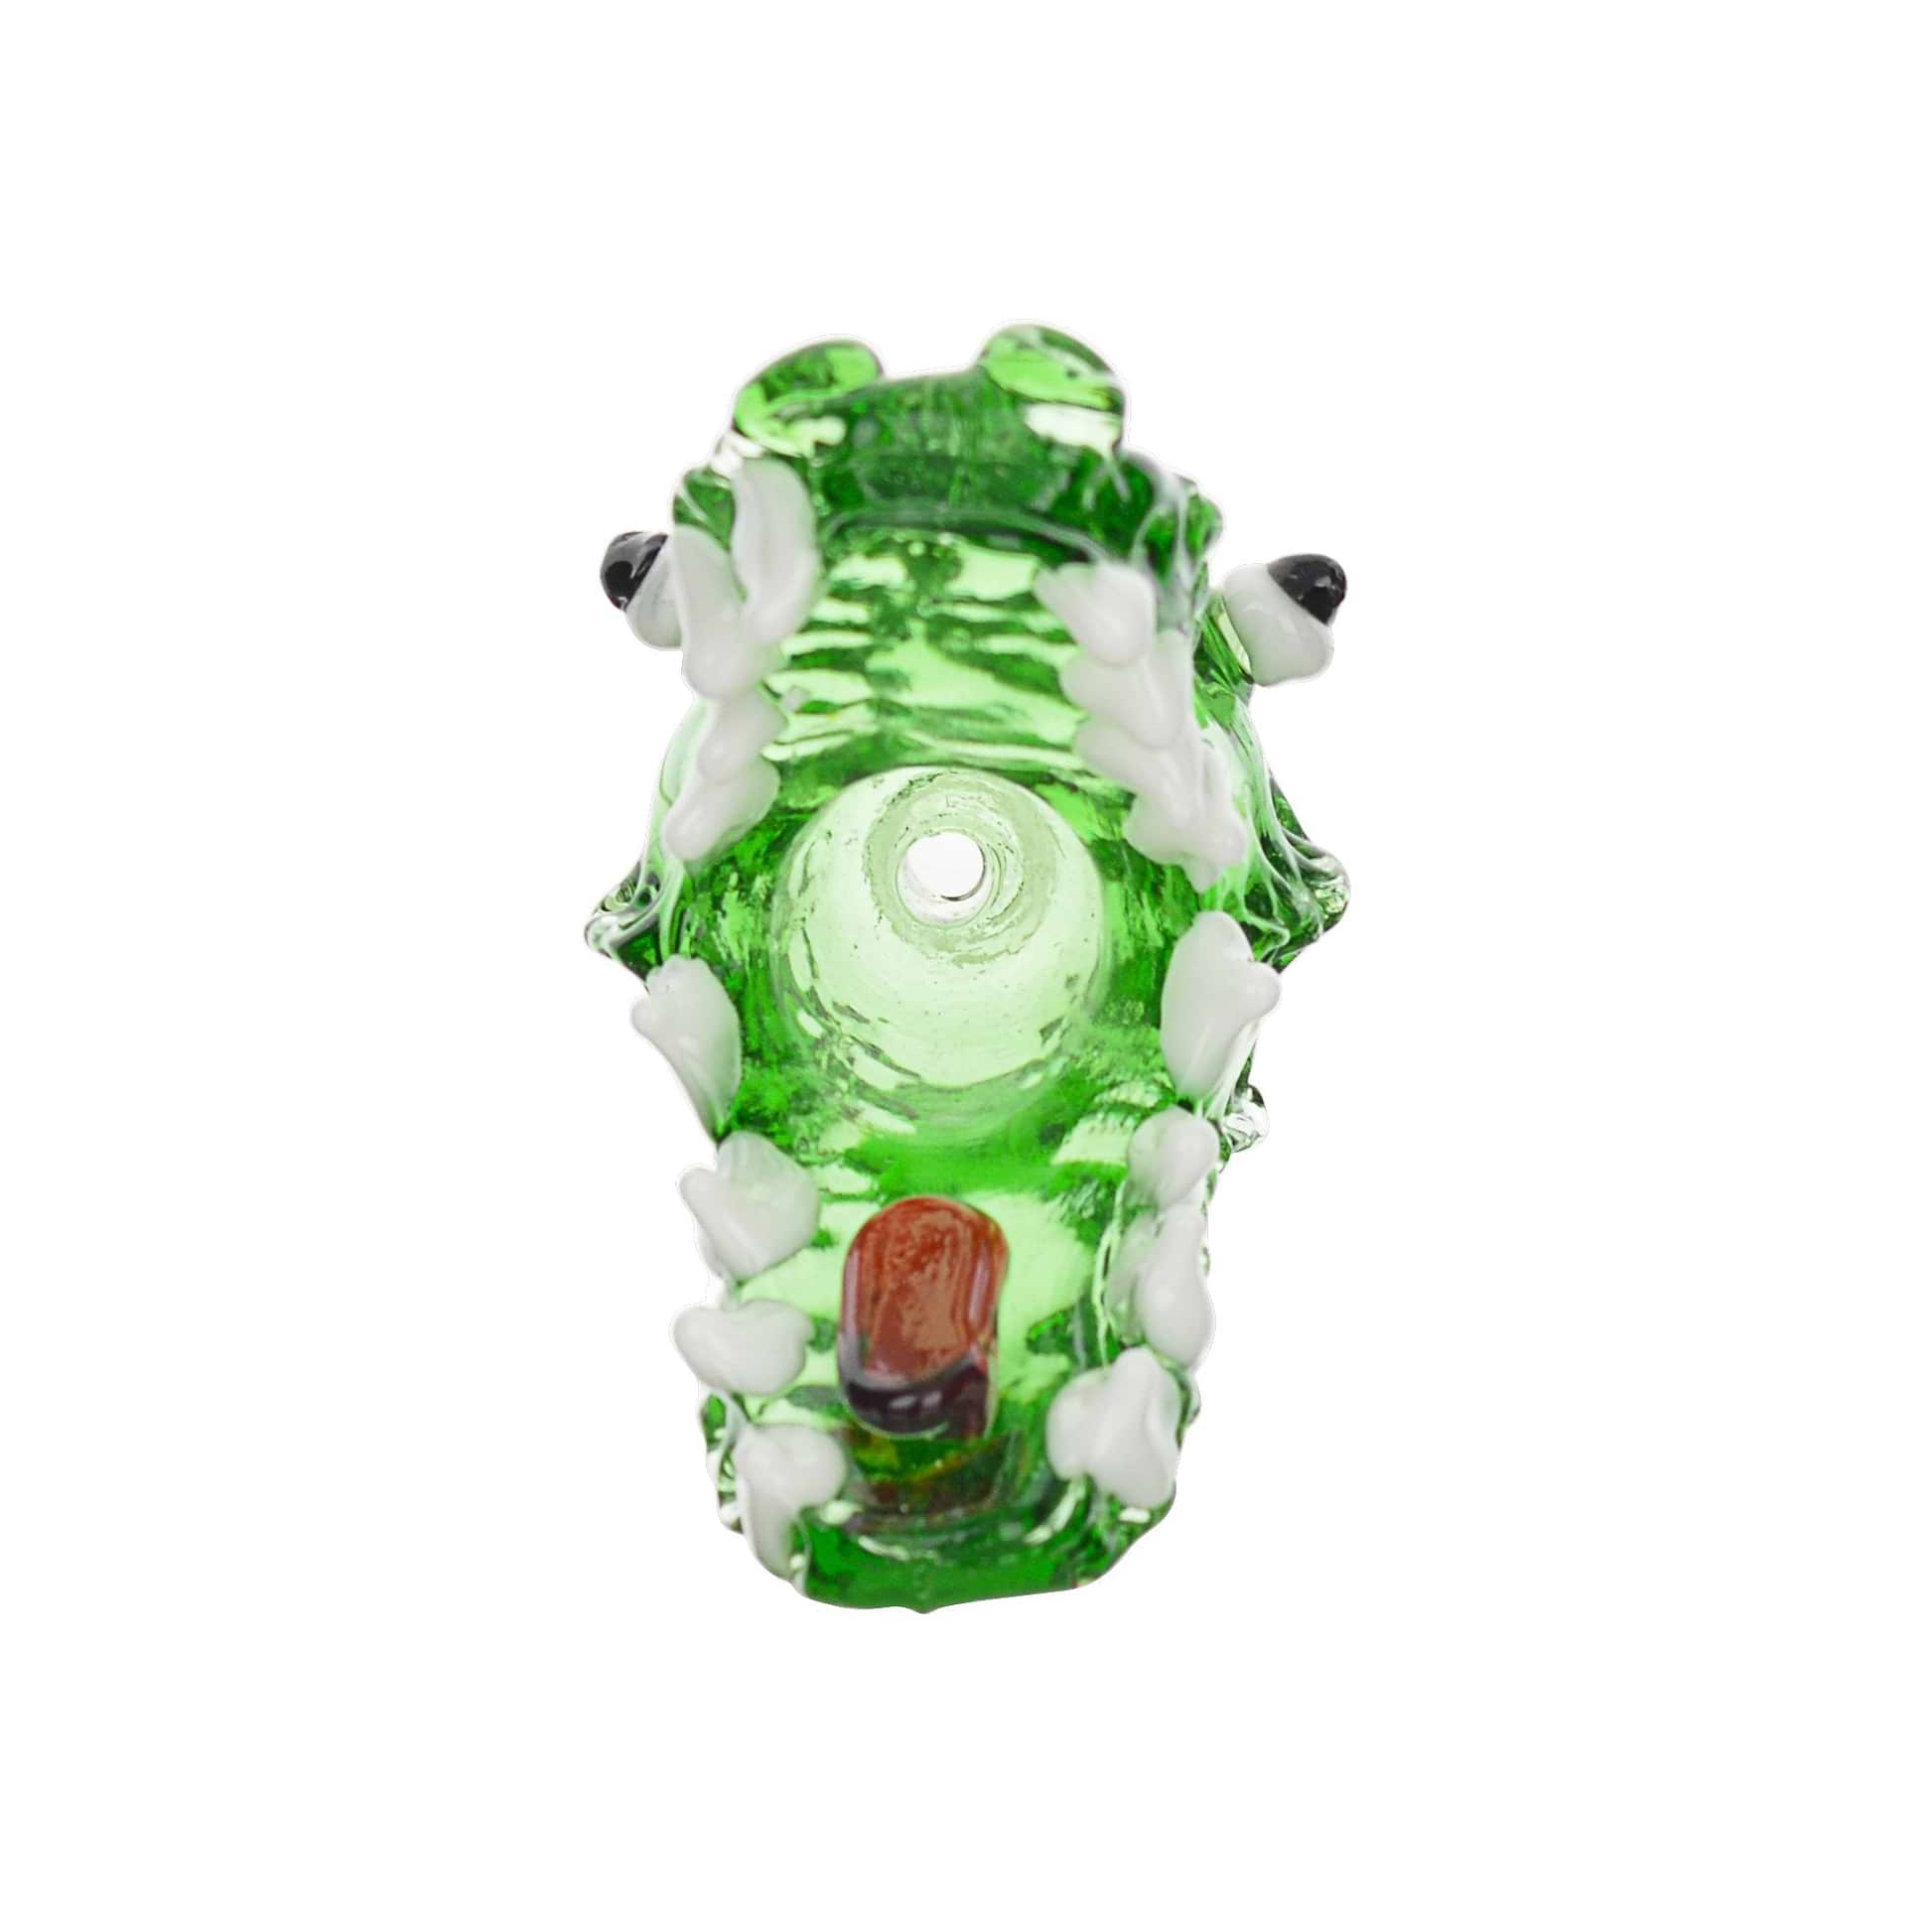 Dope male glass bowl smoking accessory sculpted face of a crocodile wide mouth large teeth and eyes